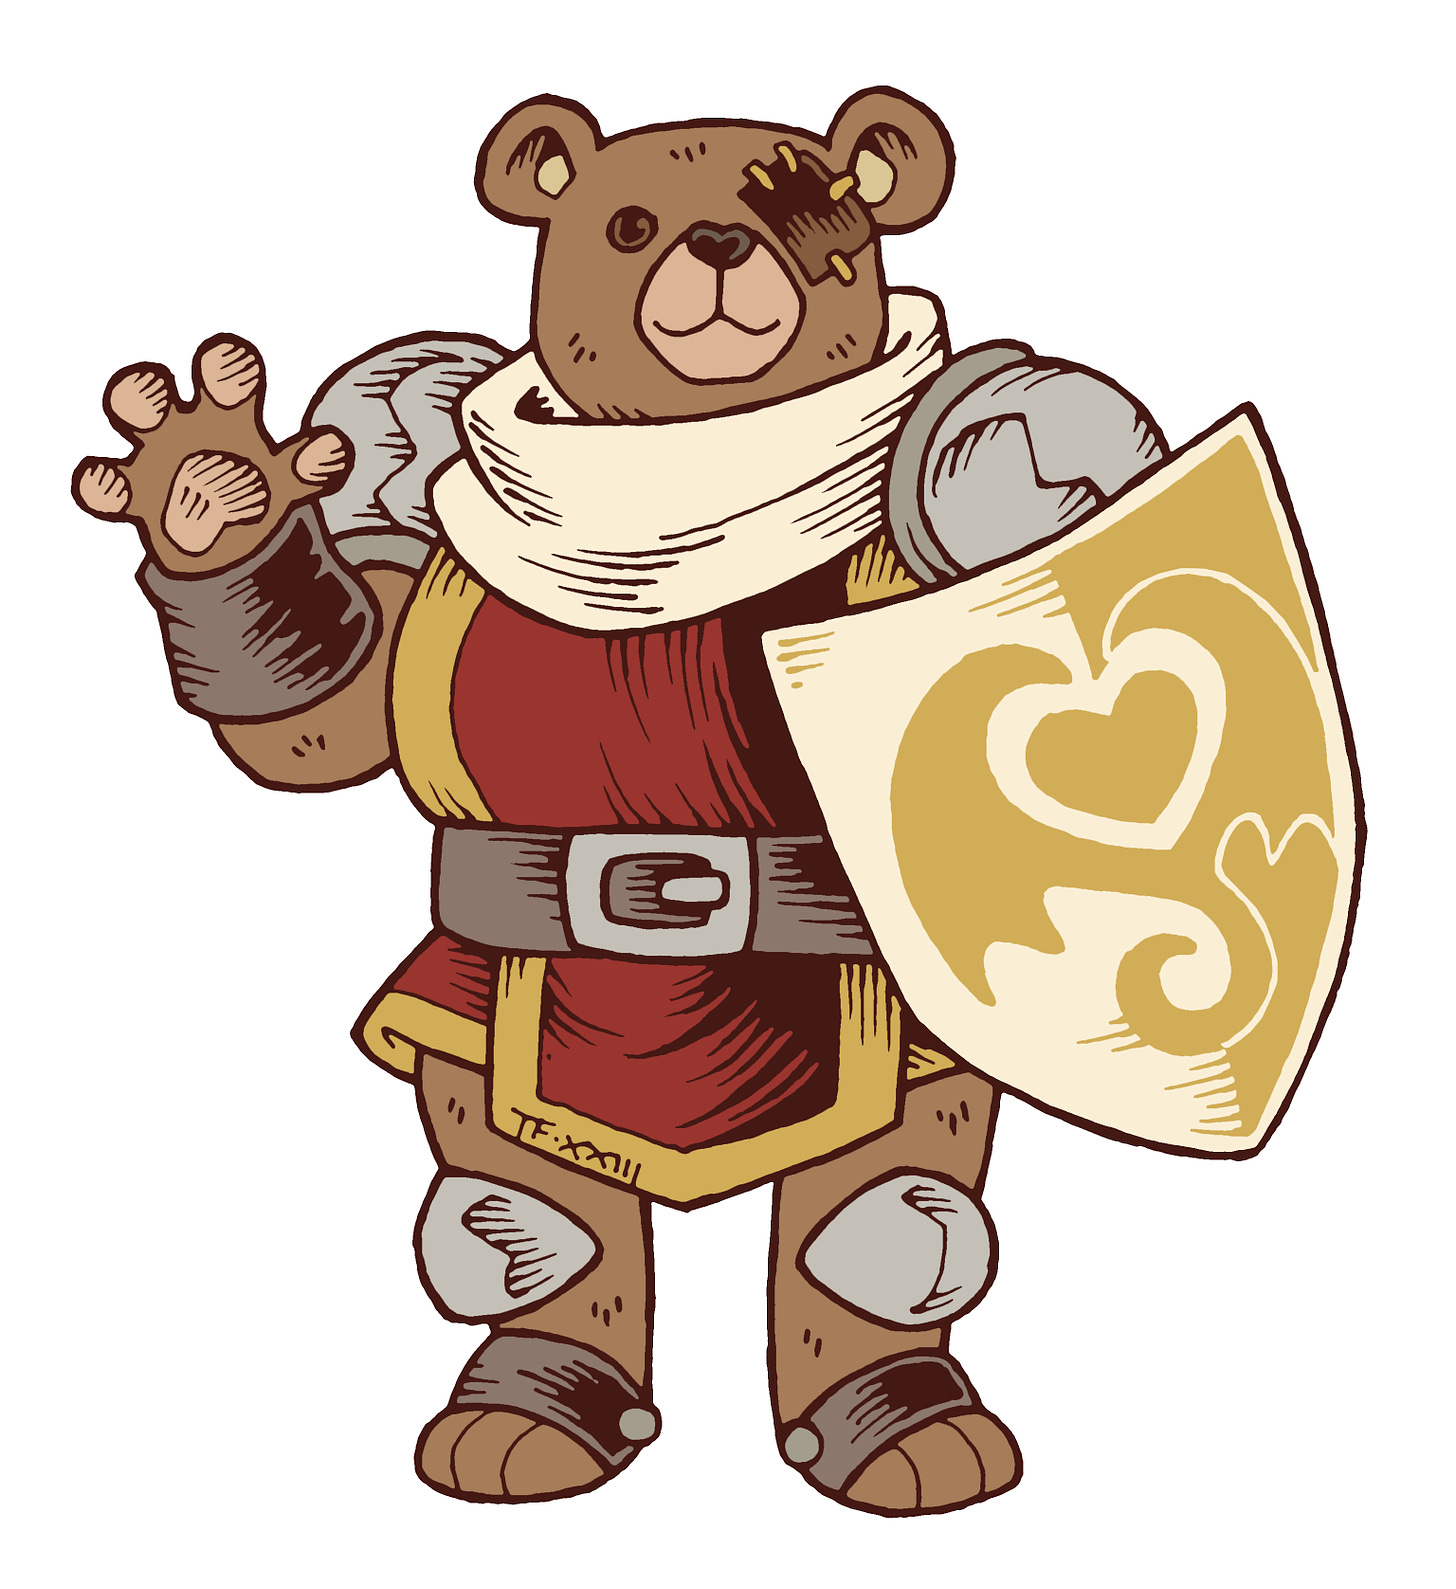 Traditionally hand drawn and digitally coloured illustration of a buff teddy bear wearing red and gold cleric robes, iron pauldrons and a golden shield, decorated with a heart symbol, encircled by dragon wings. He has an eyepath sewn over his left eye, and is smiling cheerfully.